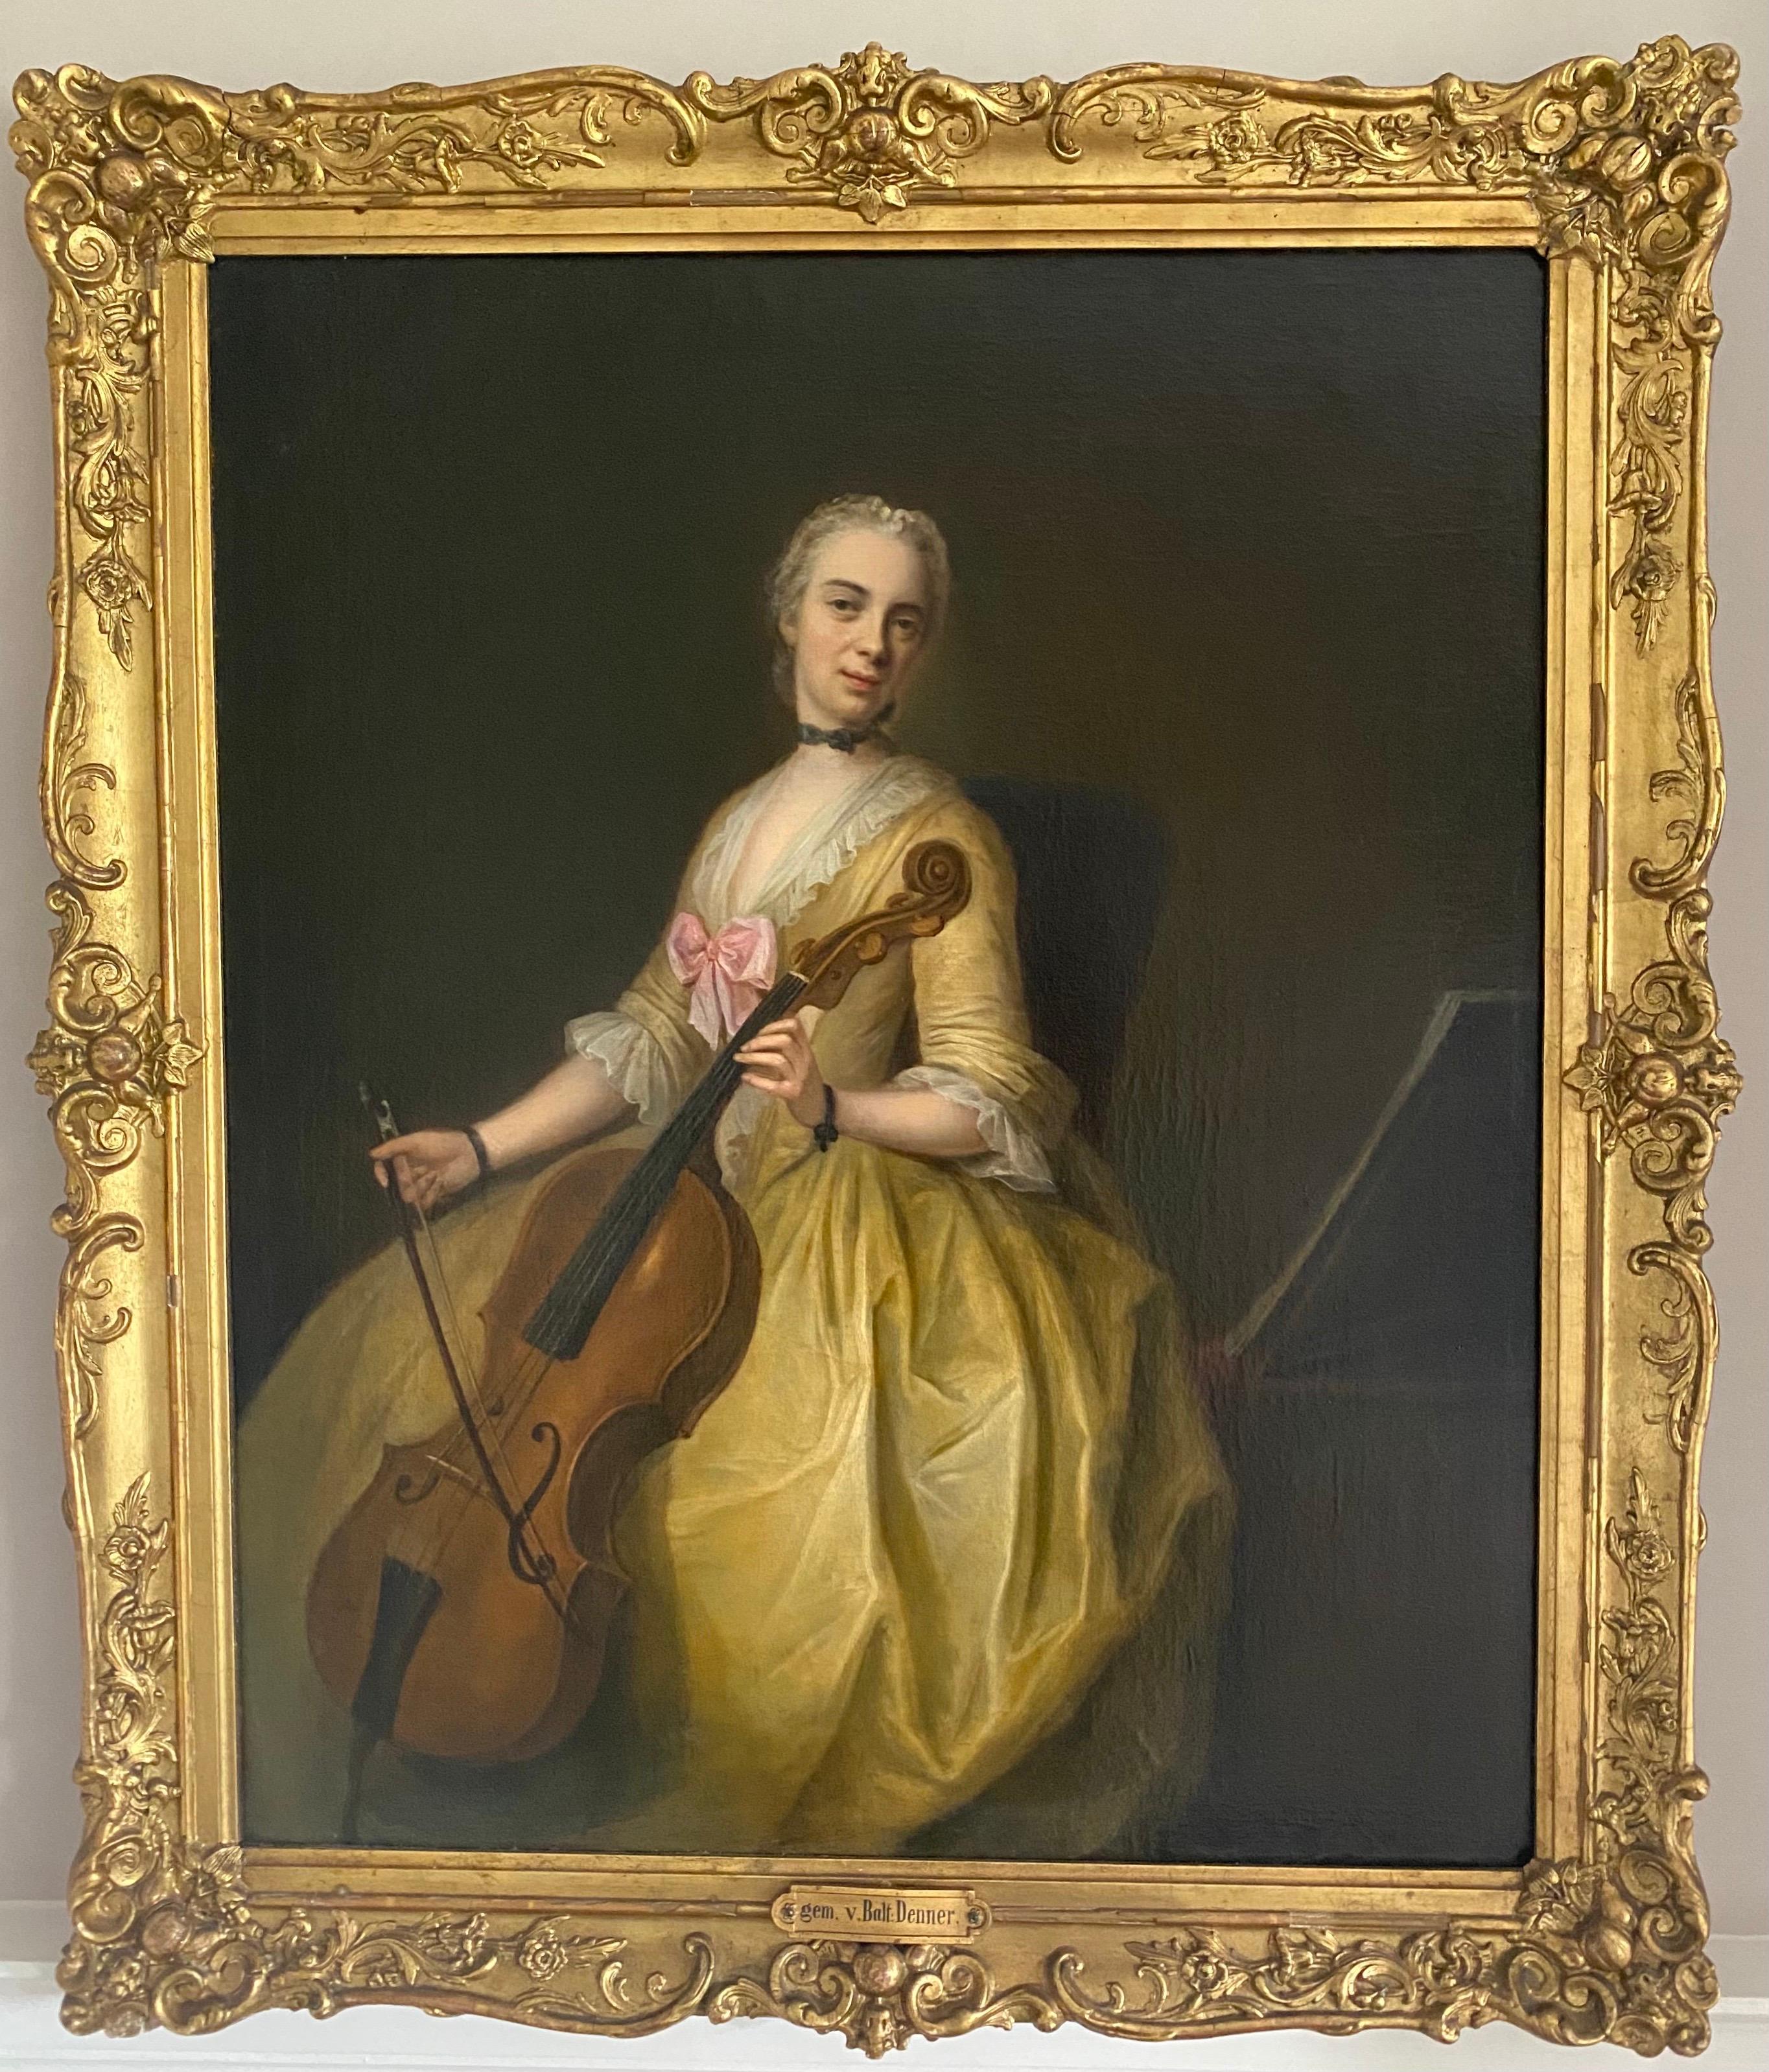 18th century portrait of the artist’s daughter, Catharina, playing the cello